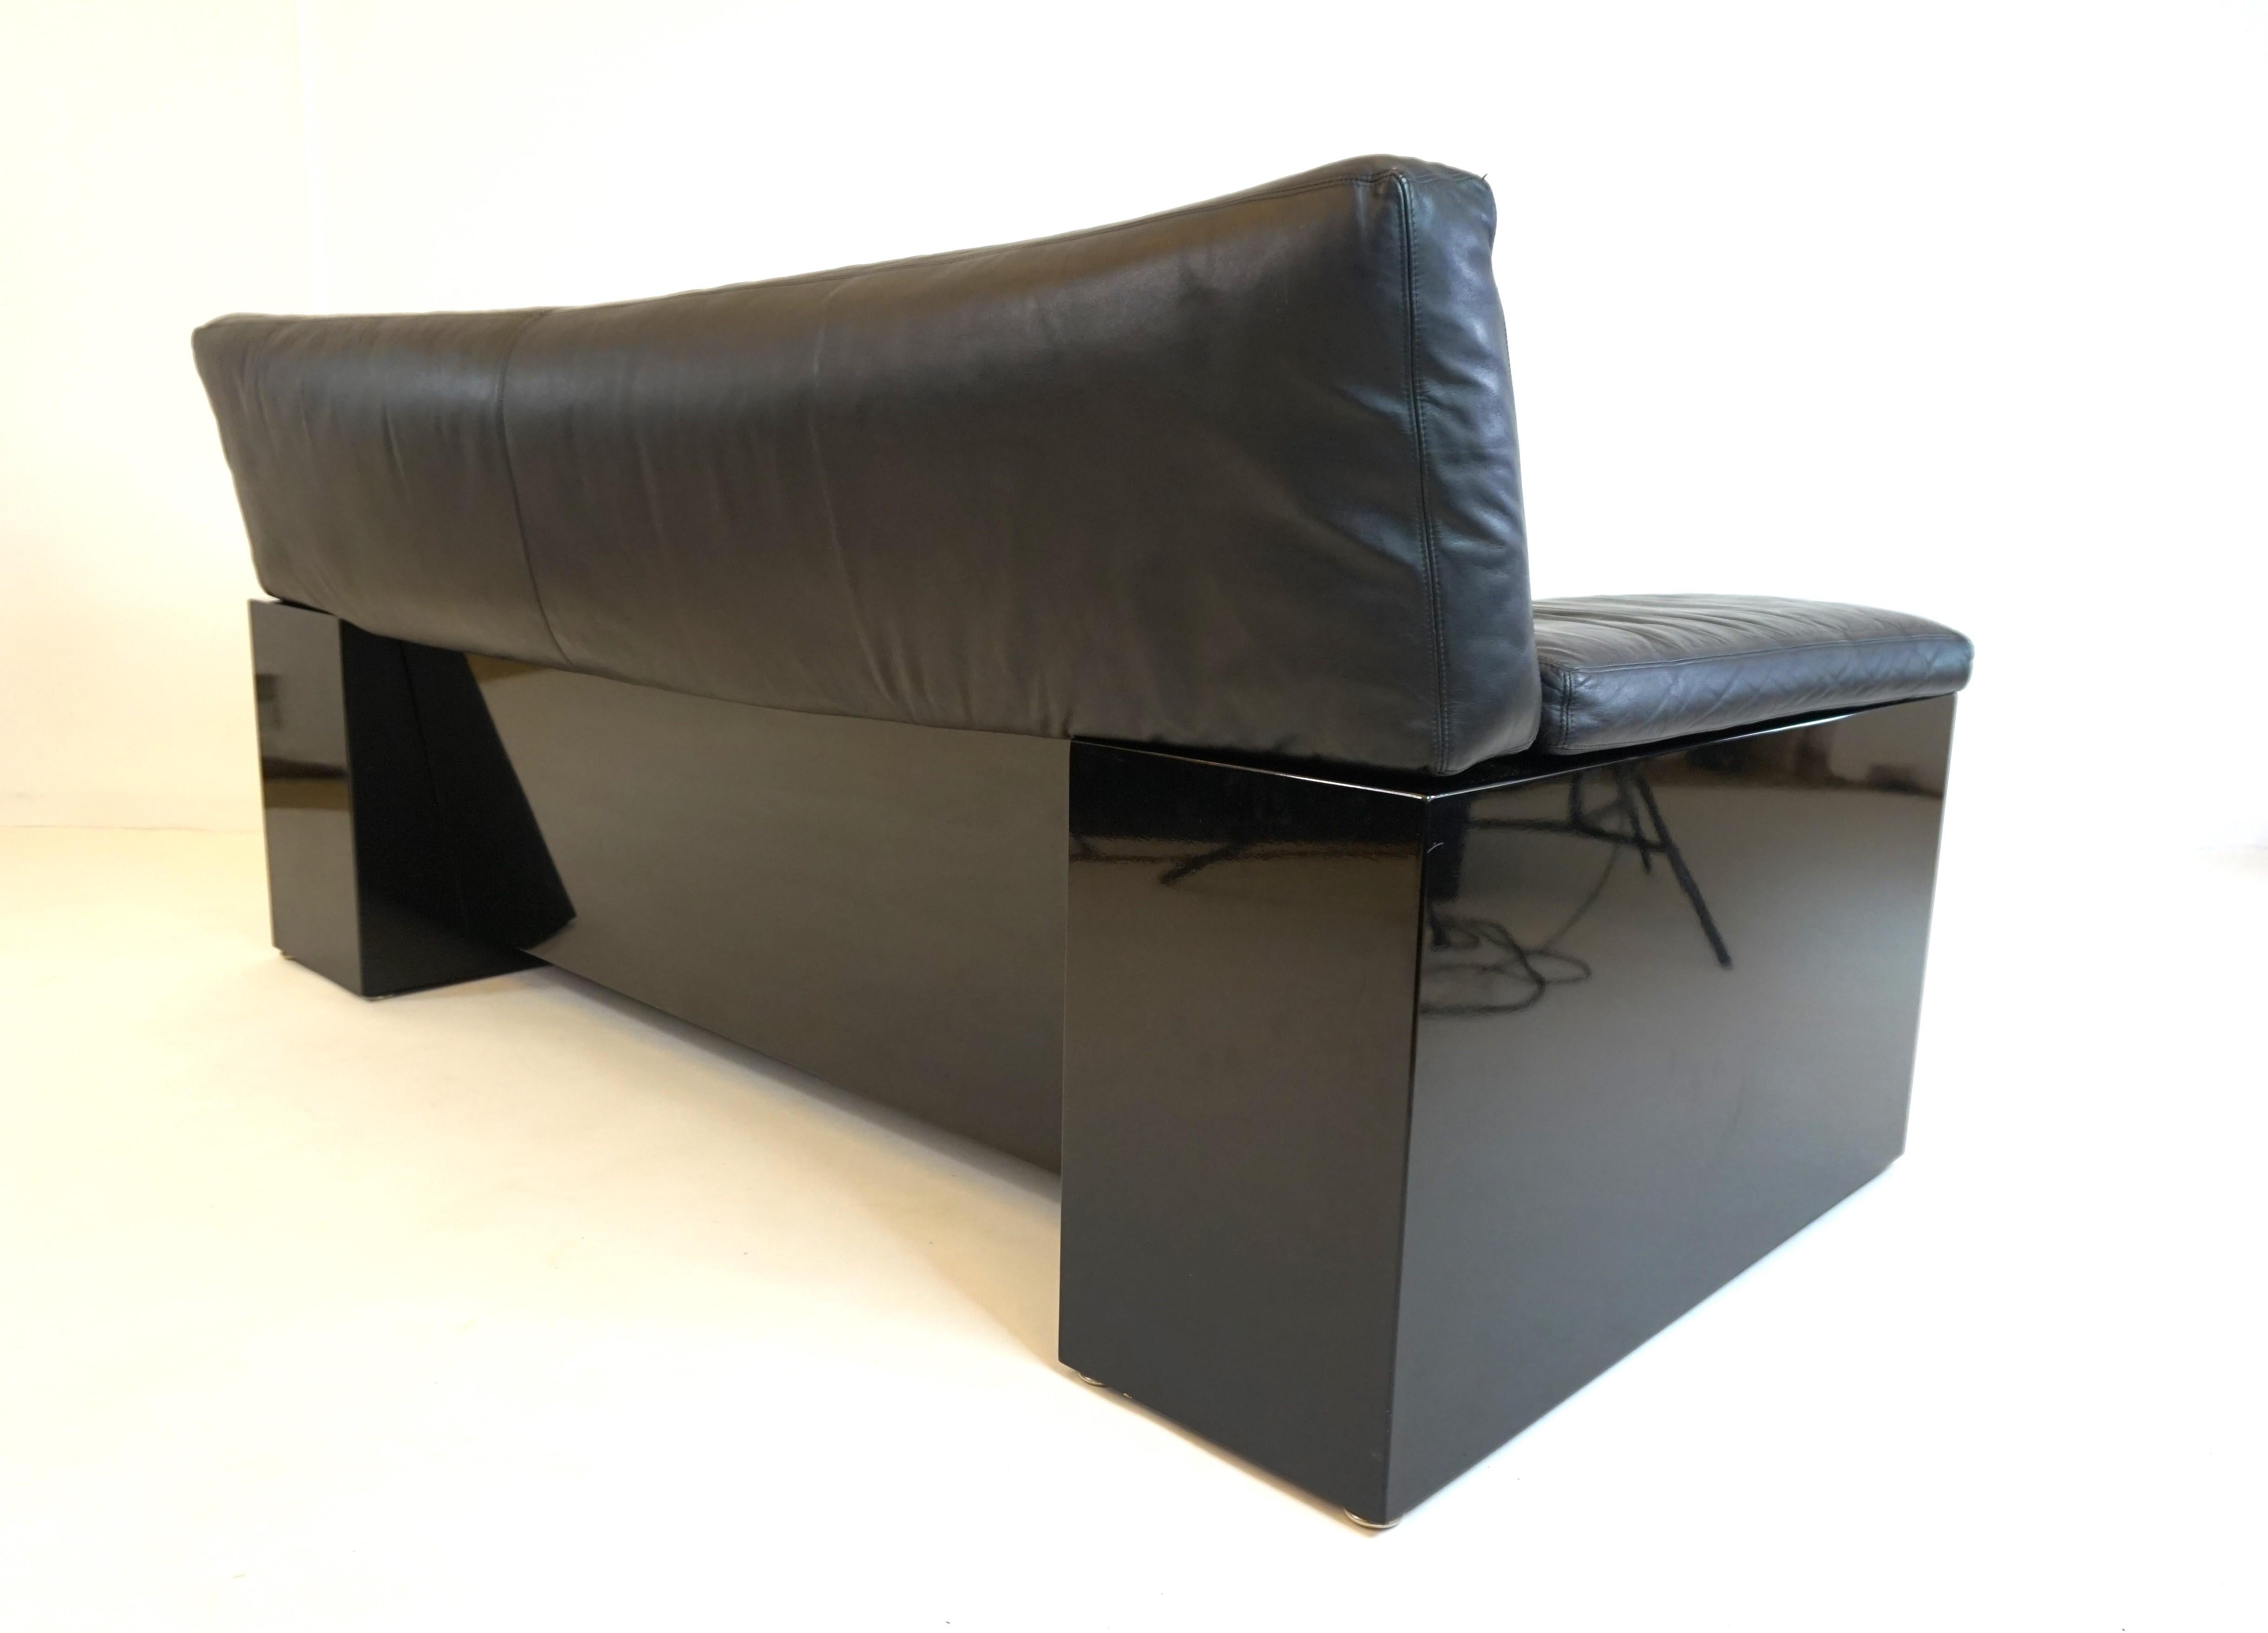 This Brigadier two-seater comes in excellent condition. The high-gloss painted black side cubes show no signs of wear. The soft, black leather is in very good condition. The suspension of the sofa is flawless and offers excellent seating comfort. A